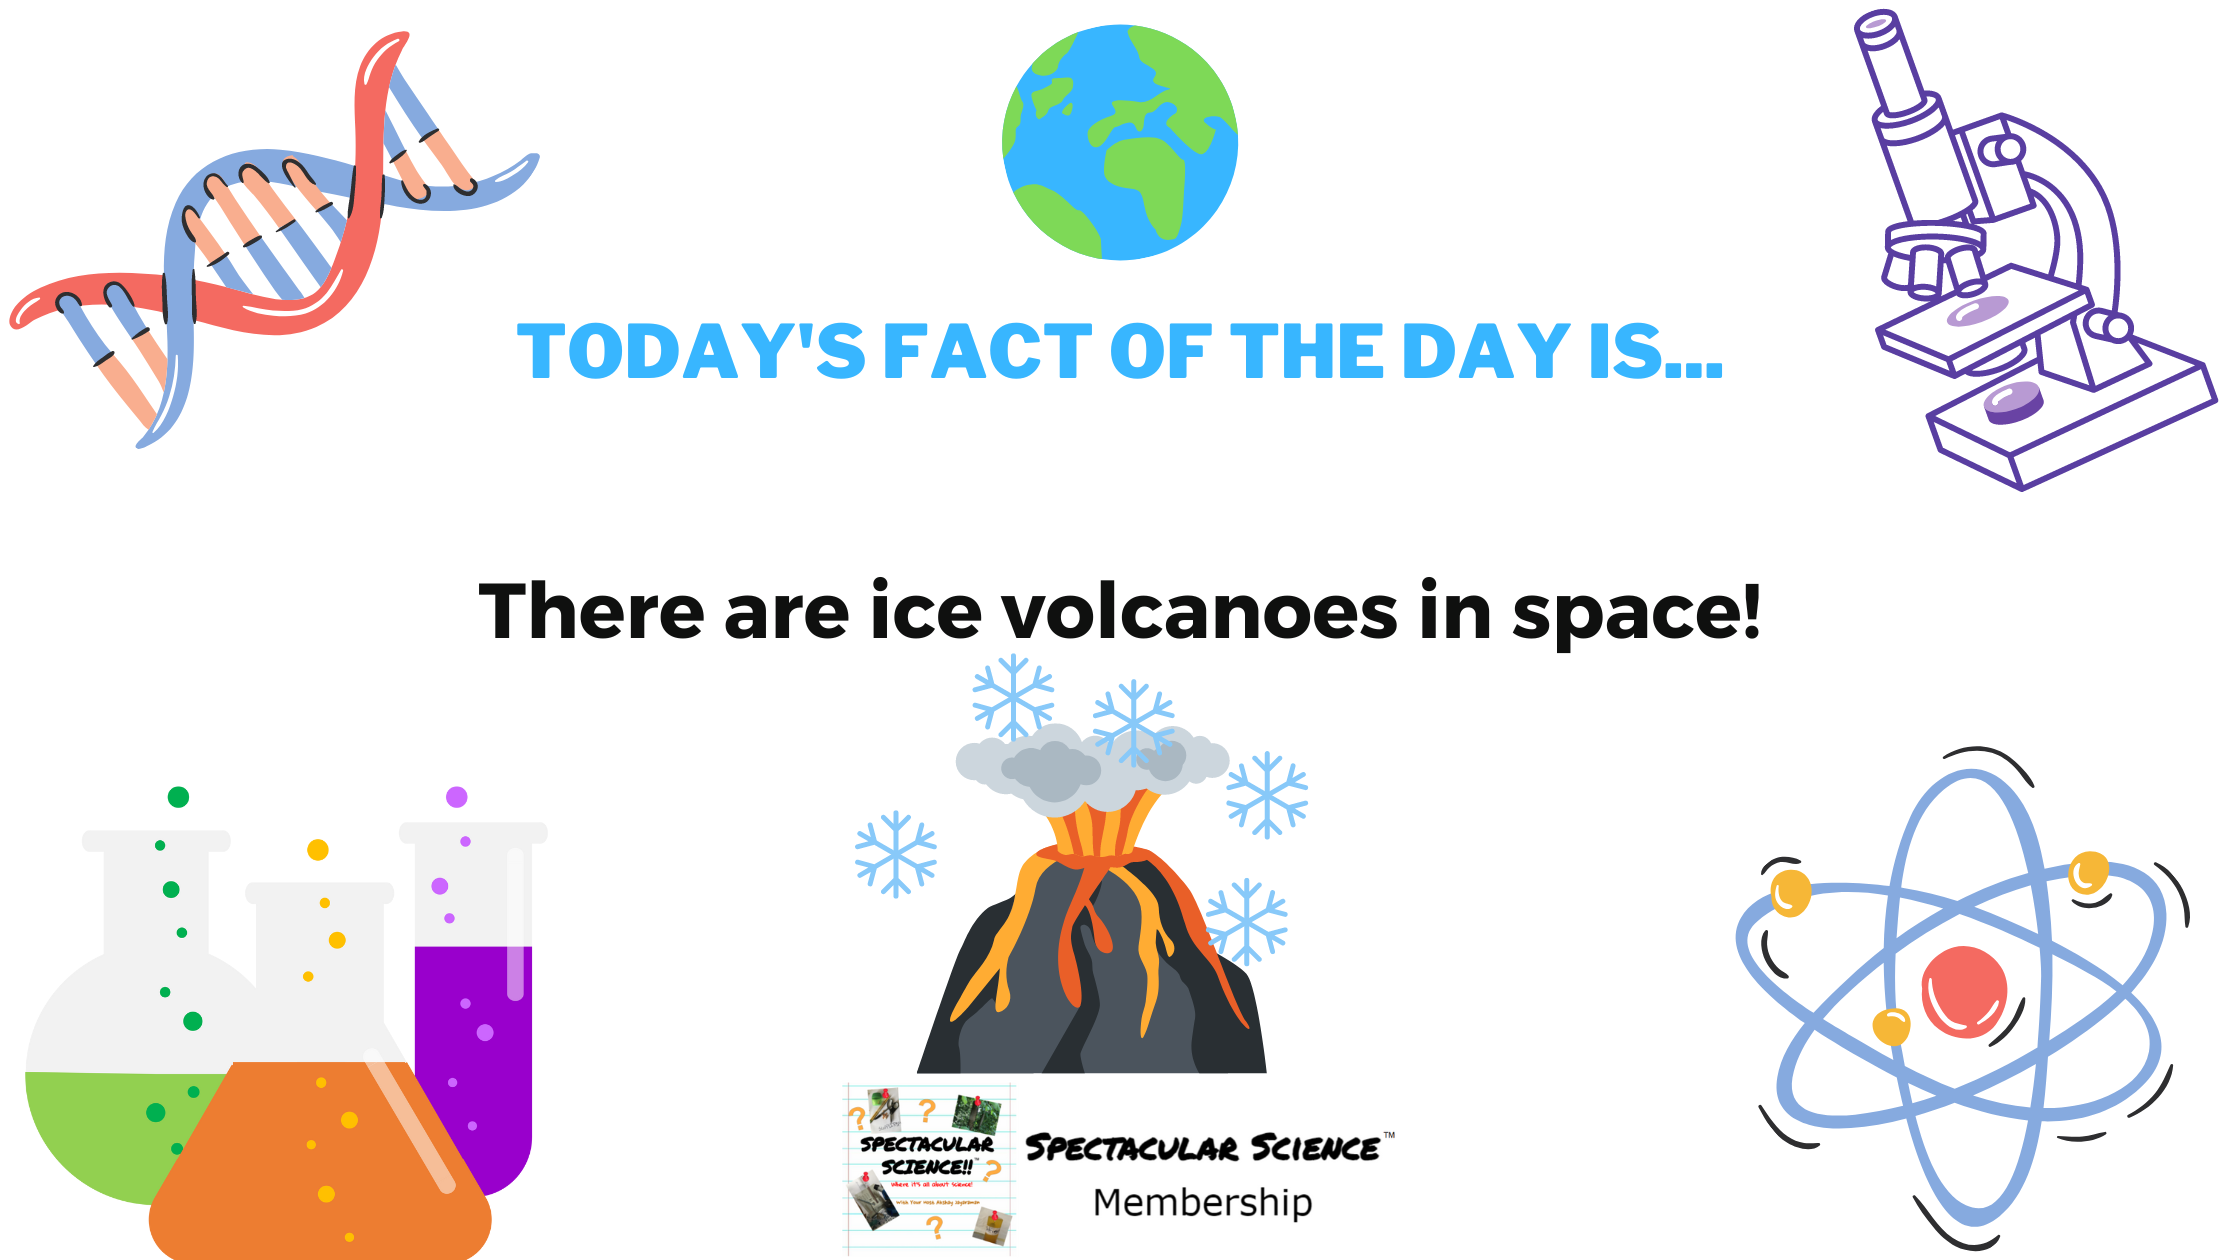 Fact of the Day Image August 21st